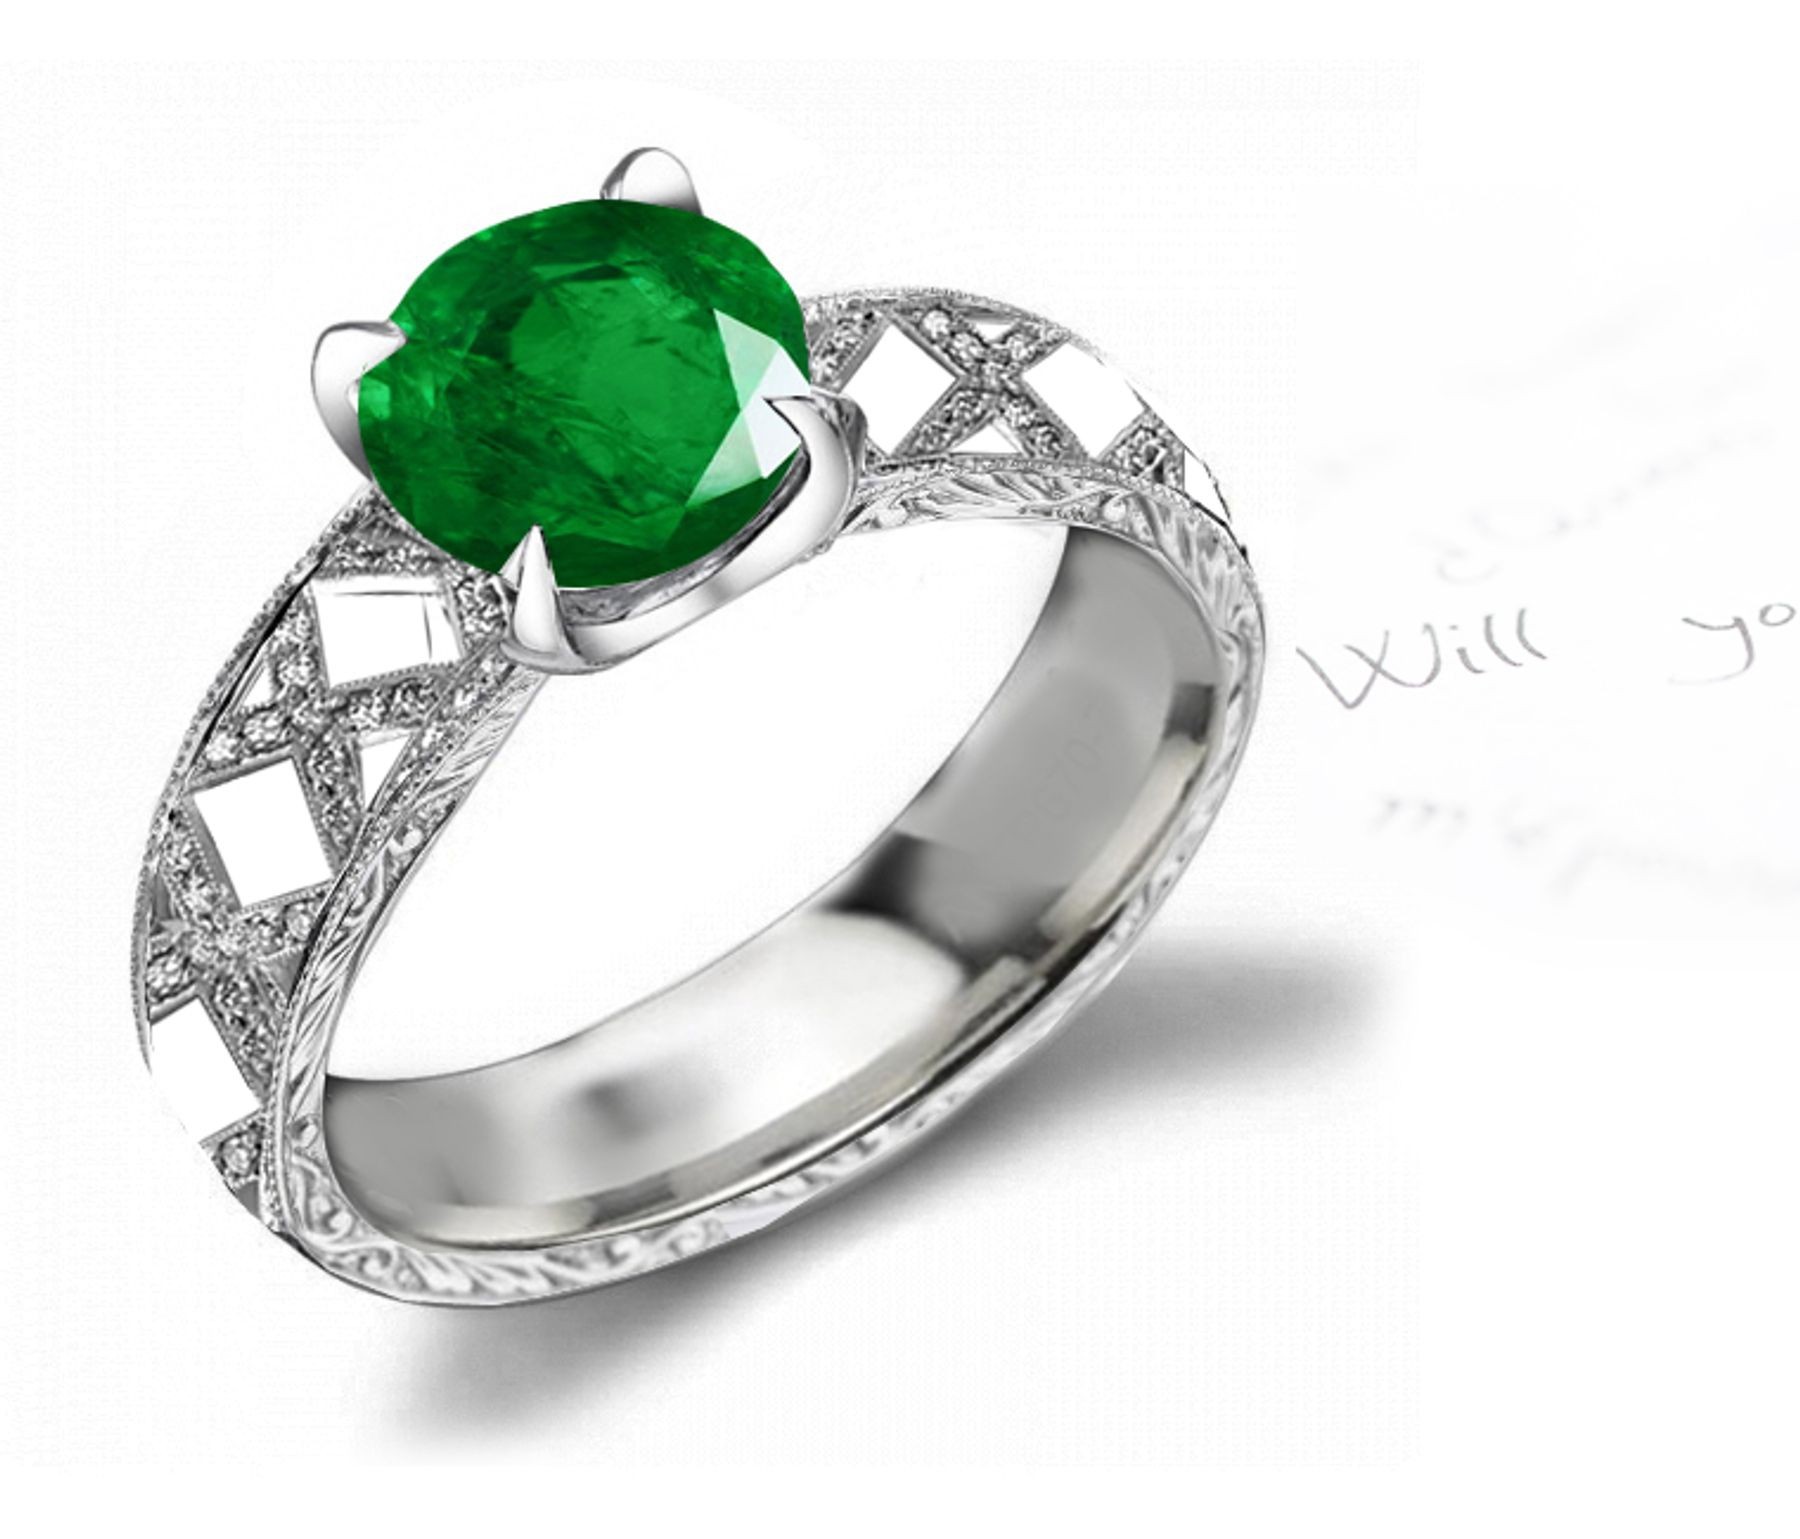 Absolutely Authentic: A Special Design Large Round Emerald & Diamond Cross Pattern Micropave Renaissance Openwork Ring